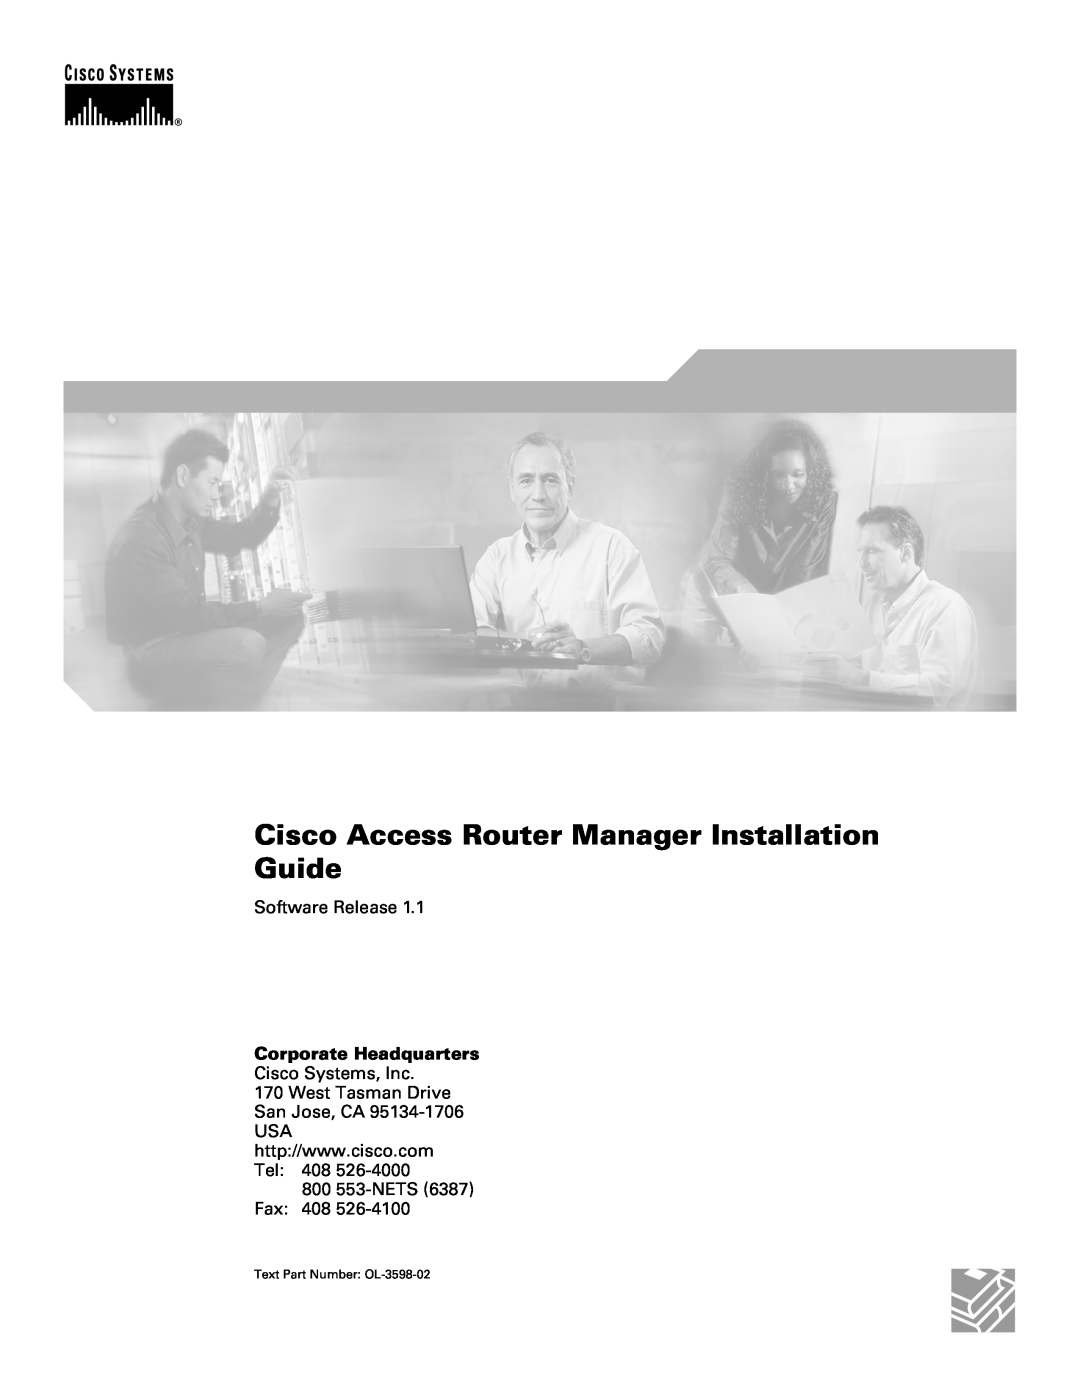 Cisco Systems OL-3598-02 manual Corporate Headquarters, Cisco Access Router Manager Installation Guide, Software Release 